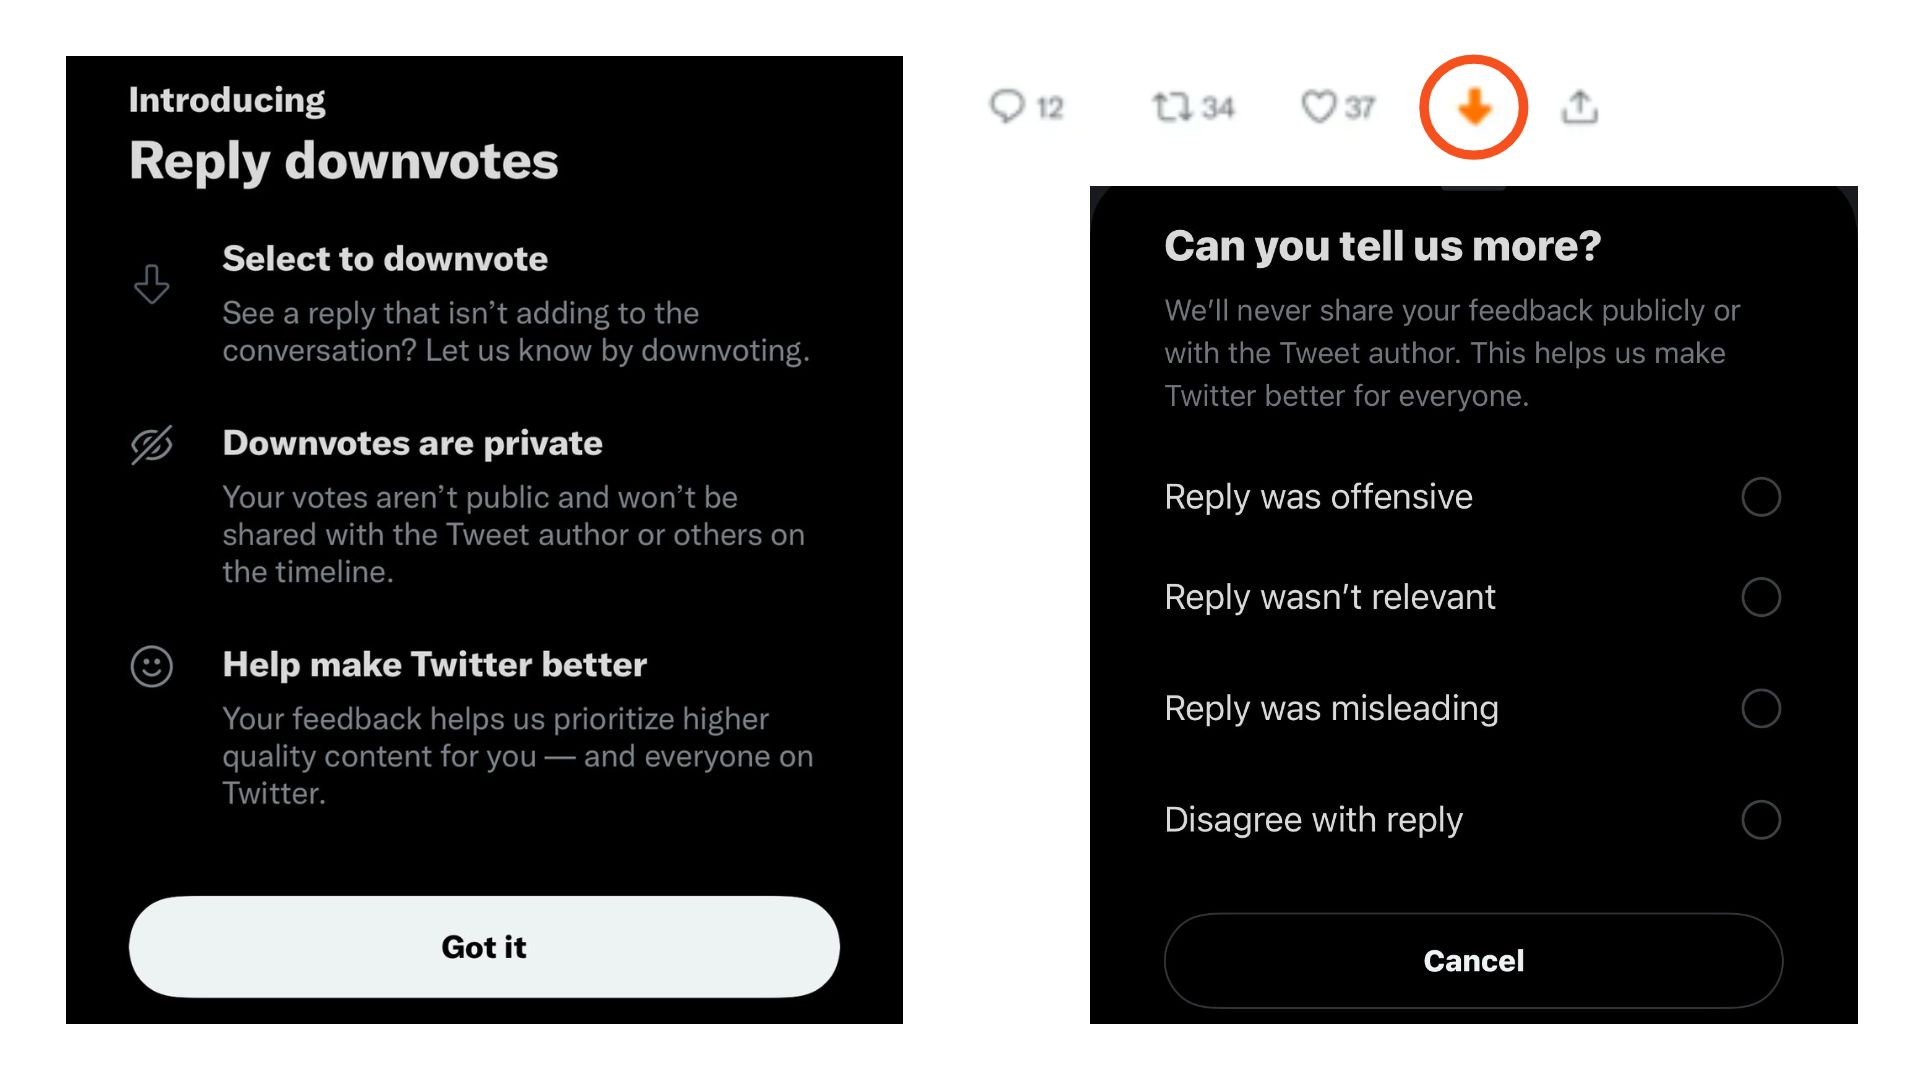 Twitter's notification when you get the downvote feature reads: Introducing reply downvotes. Select to downvote. See a reply that isn't adding to the conversation? Let us know by downvoting. Downvotes are private. Your votes aren't public and won't be shared with the Tweet author or others on the timeline. Help make Twitter better. Your feedback helps us prioritize higher quality content for you—and everyone on Twitter. On the right of this image is a screenshot of the survey that appears once you click downvote. It reads: Can you tell us more? We'll never share your feedback publicly or with the Tweet author. This helps us make Twitter better for everyone. 1: Reply was offensive. 2: Reply wasn't relevant. 3: Reply was misleading. 4: Disagree with reply. 